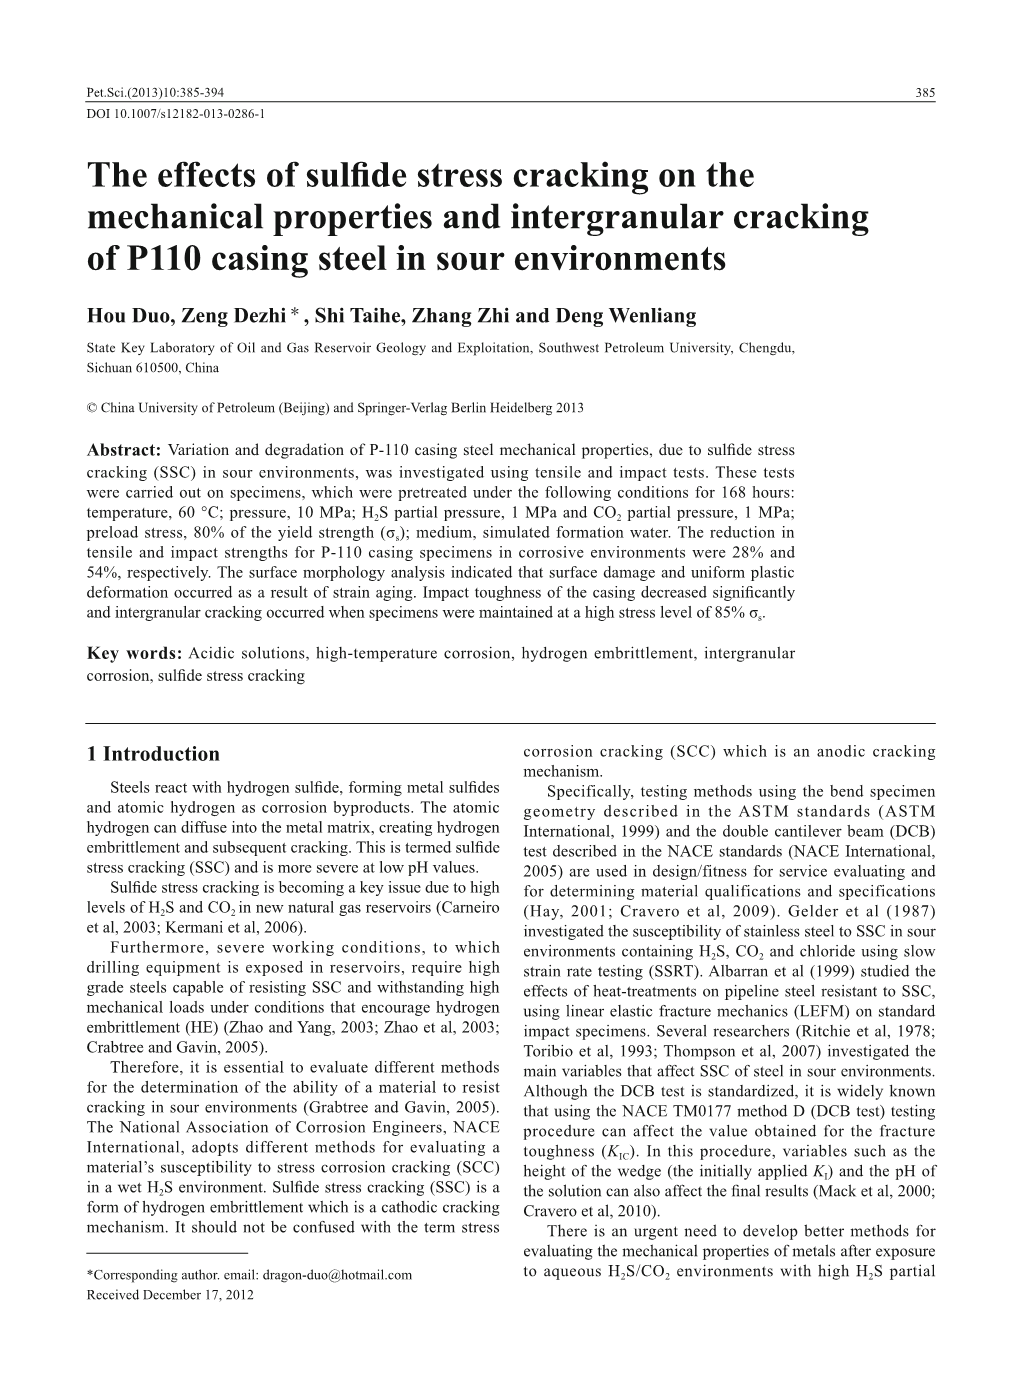 The Effects of Sulfide Stress Cracking on the Mechanical Properties And